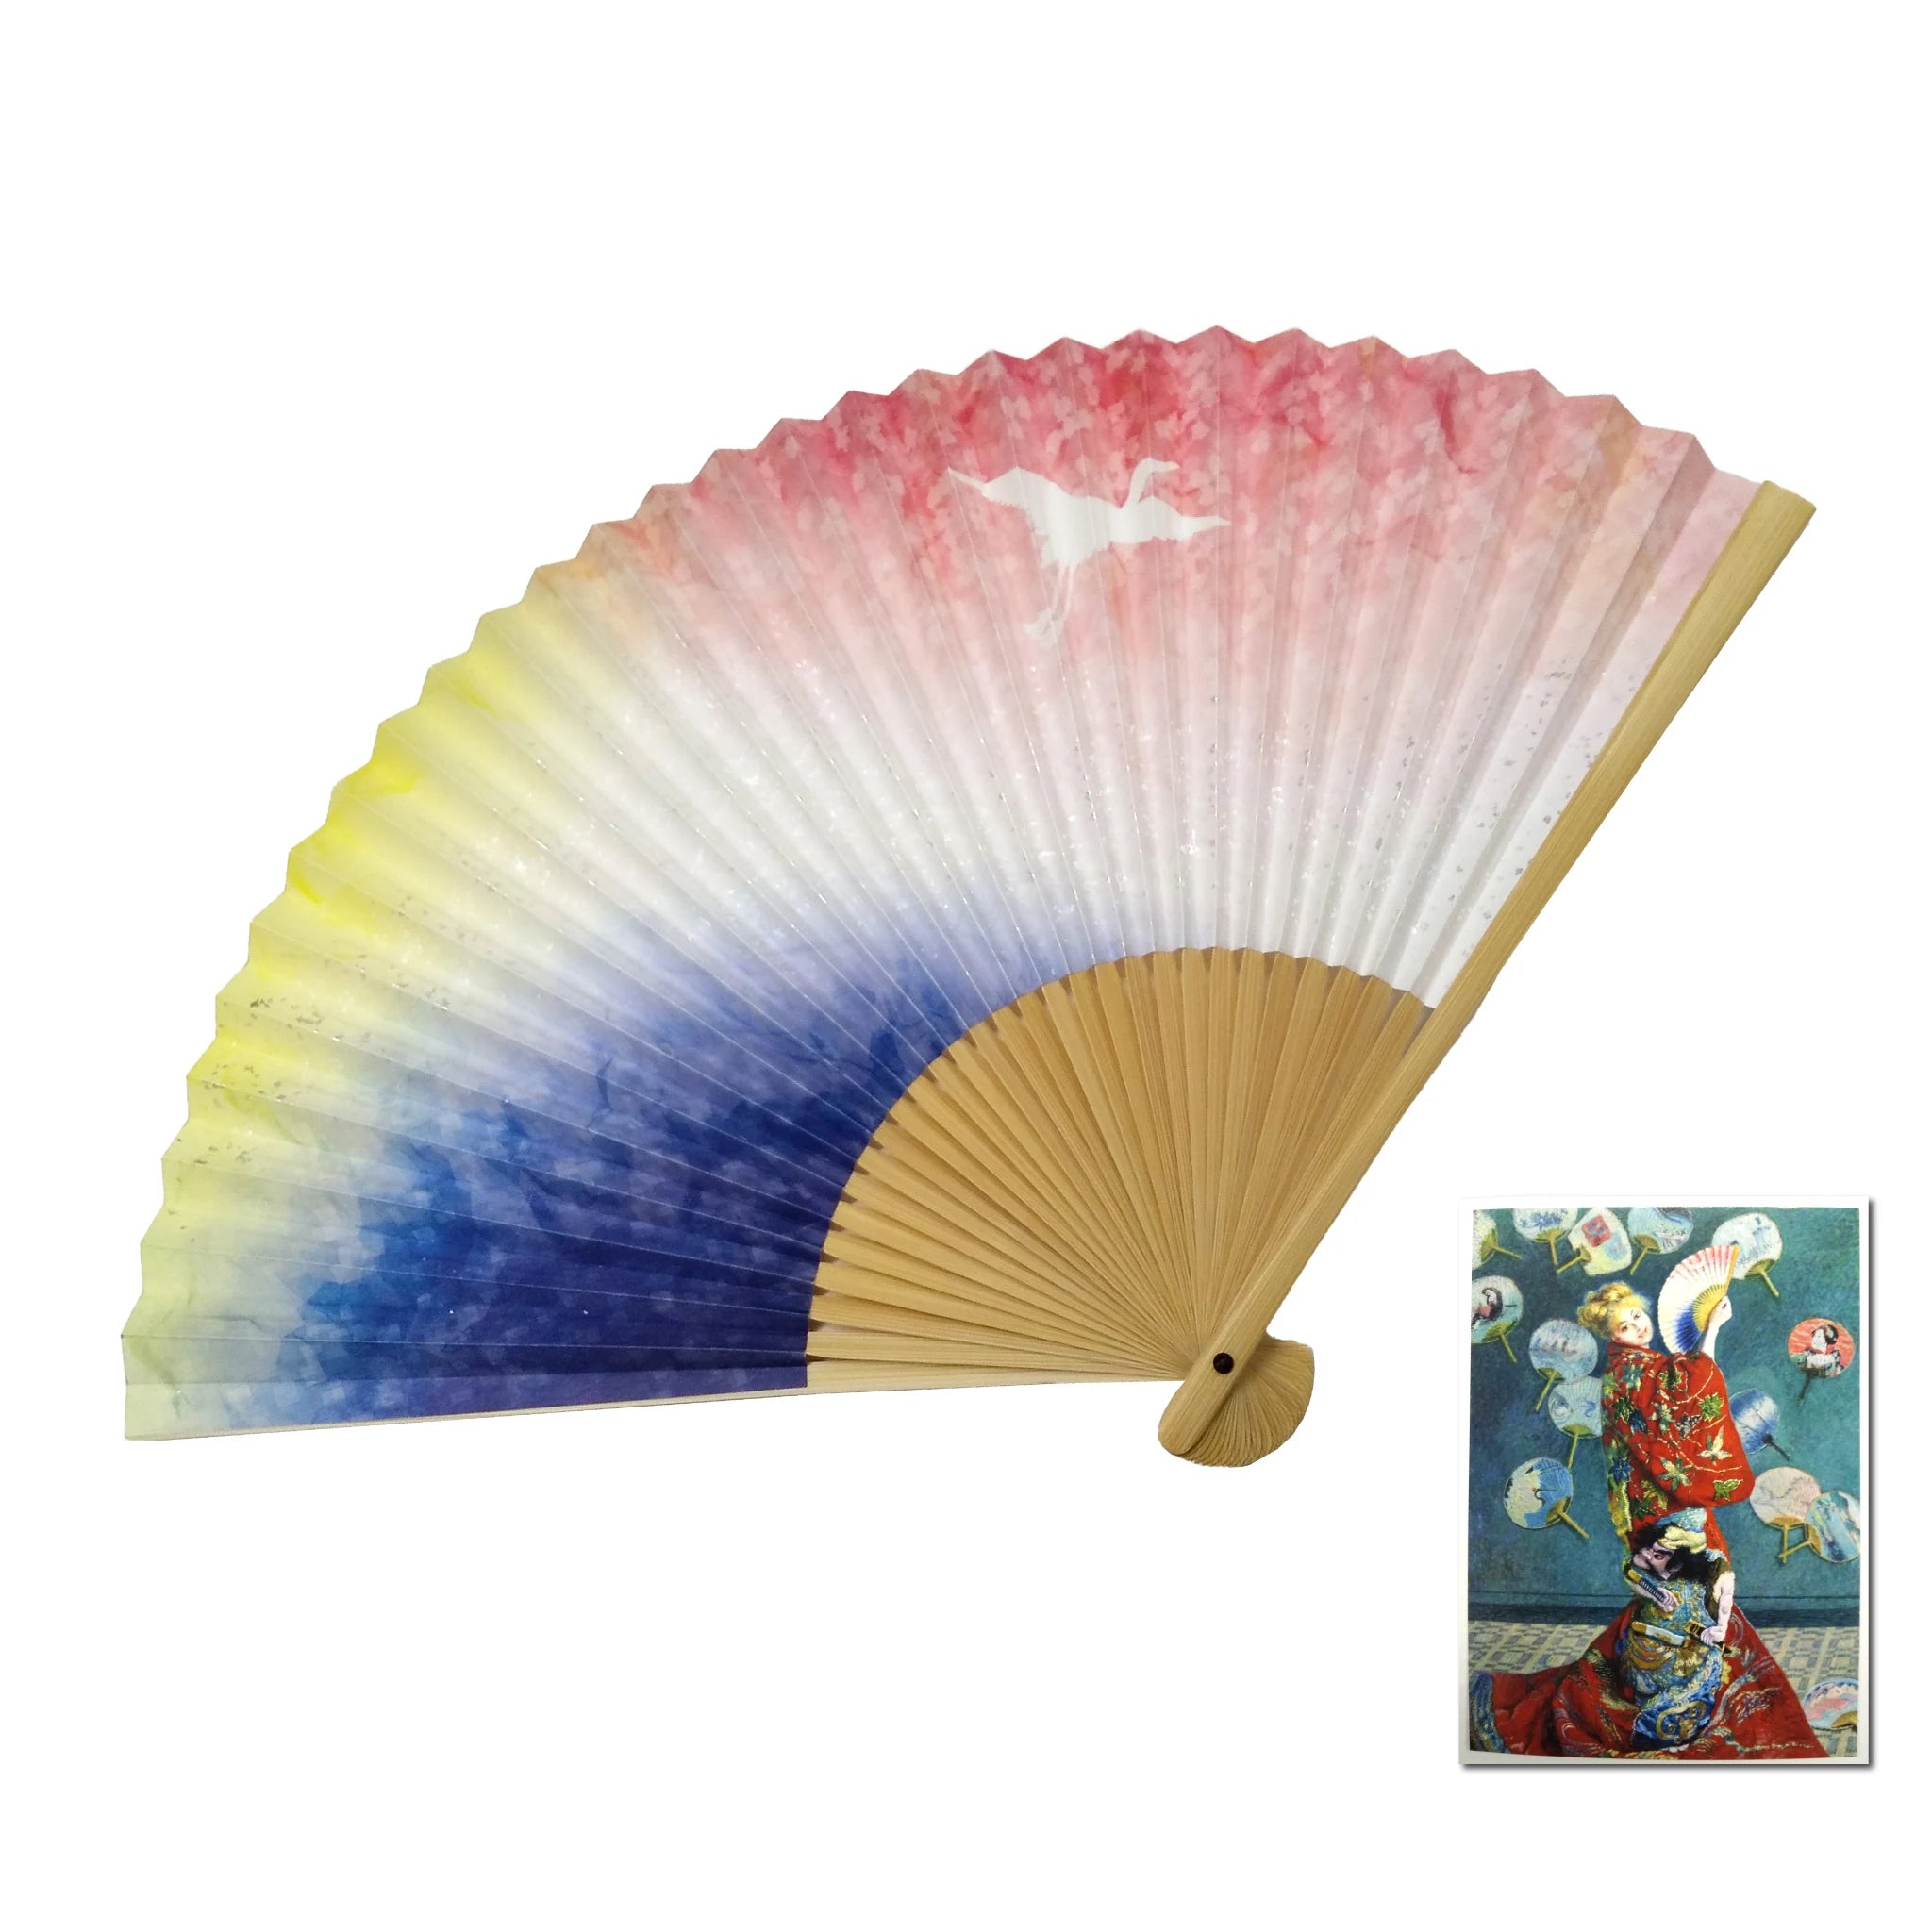 en_products_new-work-for-2023-claude-monet-la-japonaise-fan_Claude Monet  u0026quot;La Japonaiseu0026quot; fan – 江戸扇子とうちわの老舗通販_伊場仙